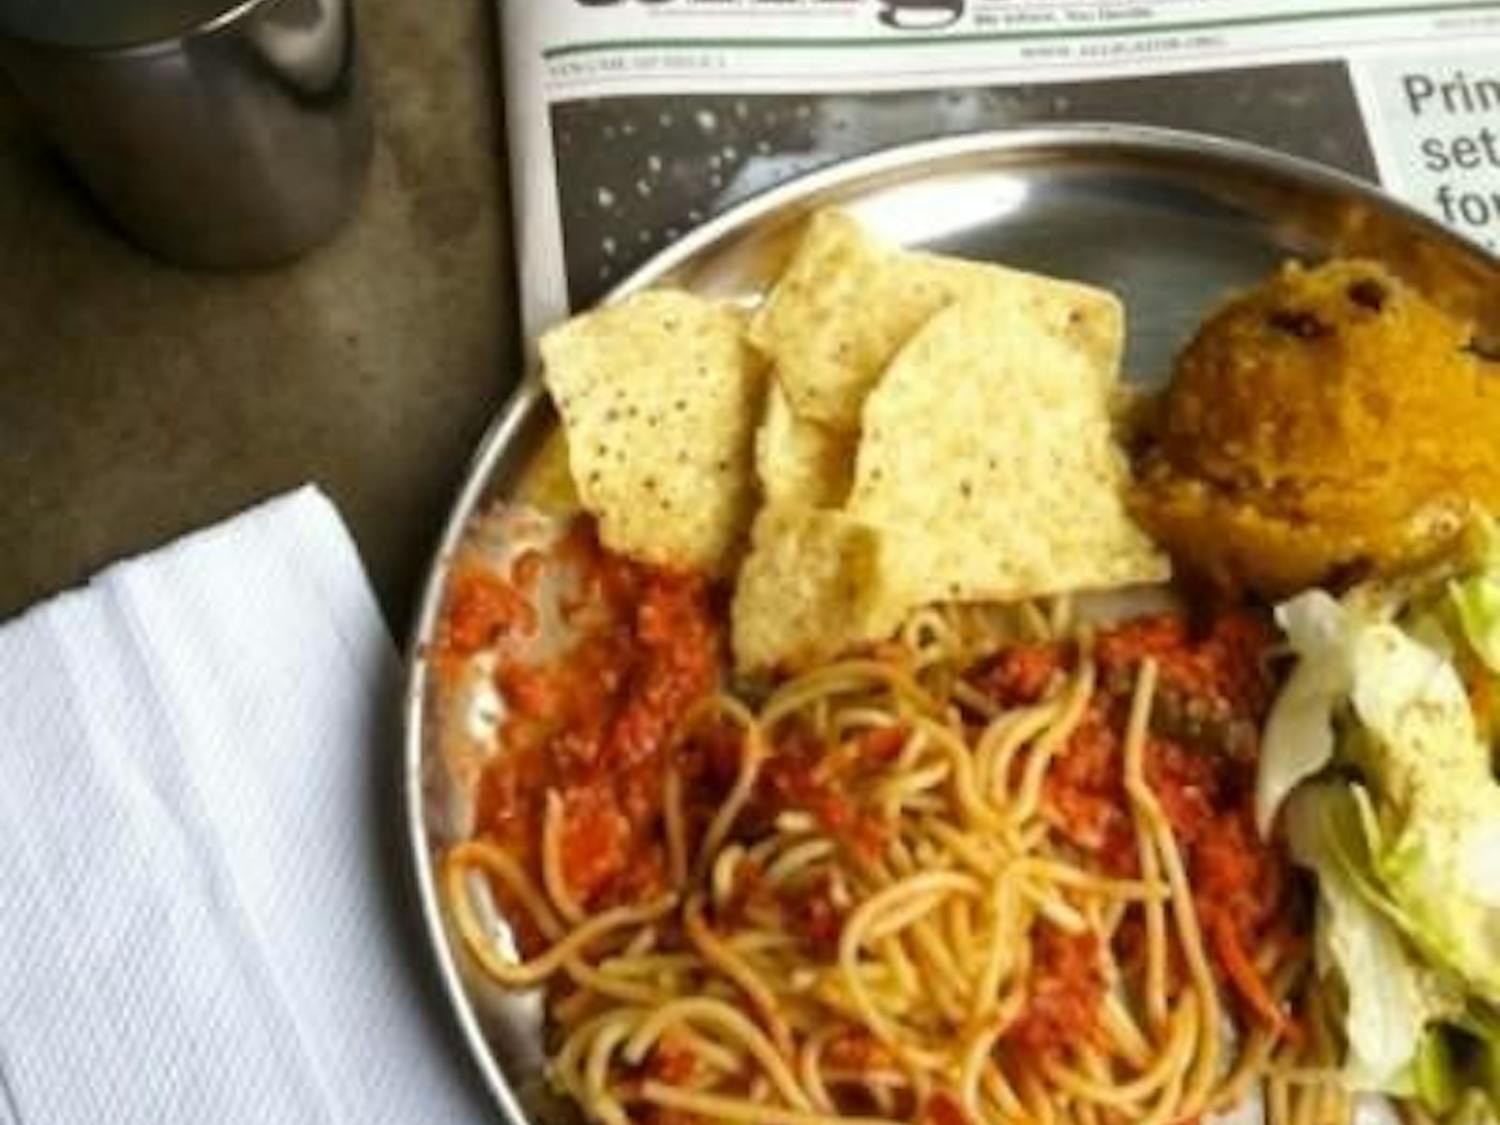 Spaghetti Wednesdays are gone. Hare Krishna is responding to numerous student complaints that the iconic Wednesday meal was hard to eat, by changing to an easier pasta meal.